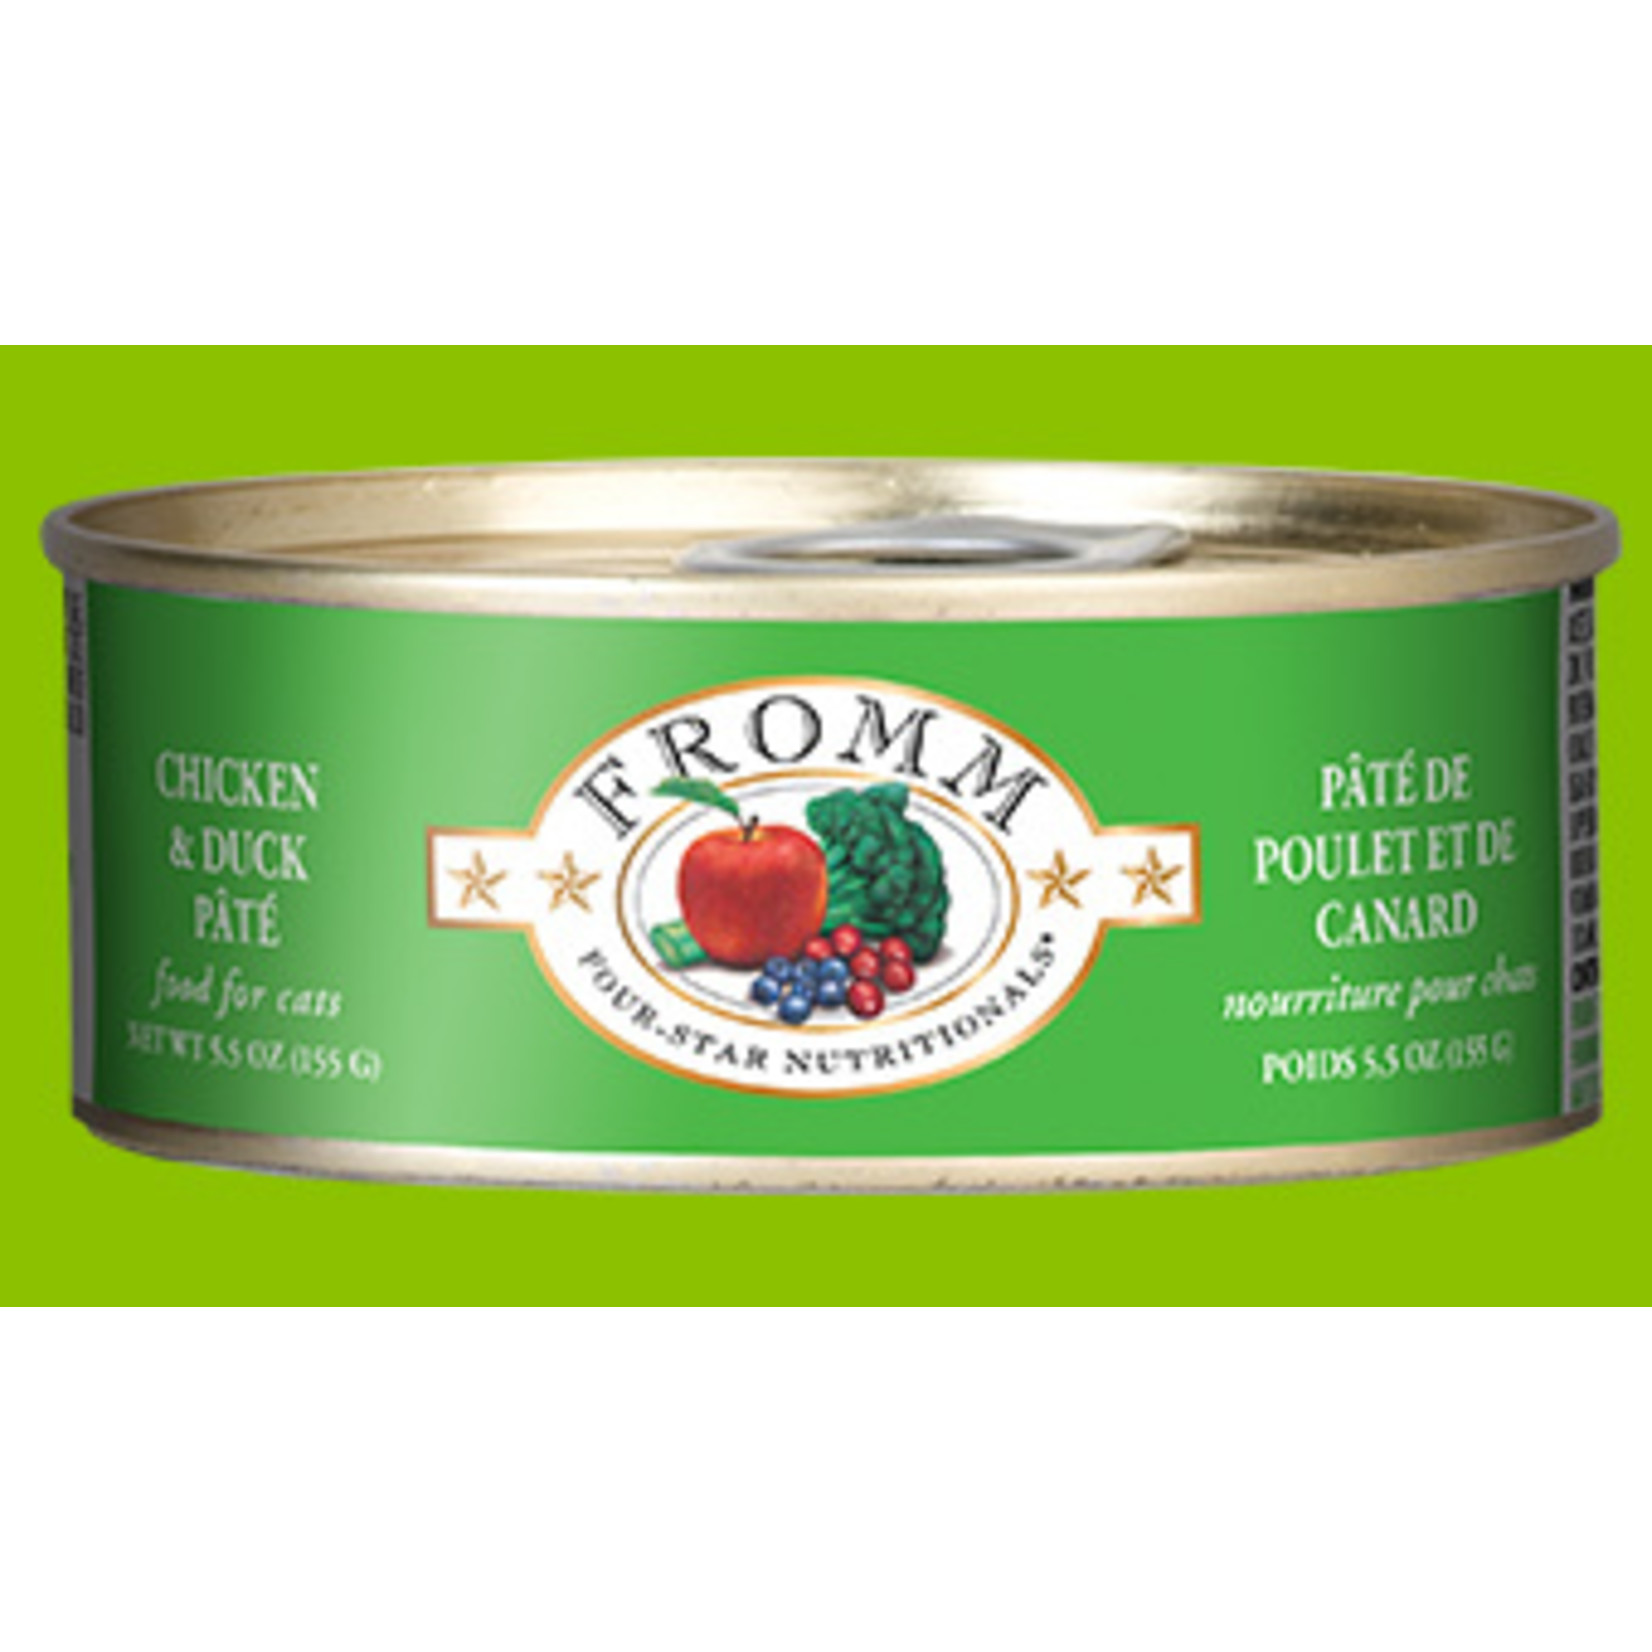 Fromm Fromm Wet Cat Food Four Star Nutritionals Chicken & Duck Pate 5.5oz Can Grain Free